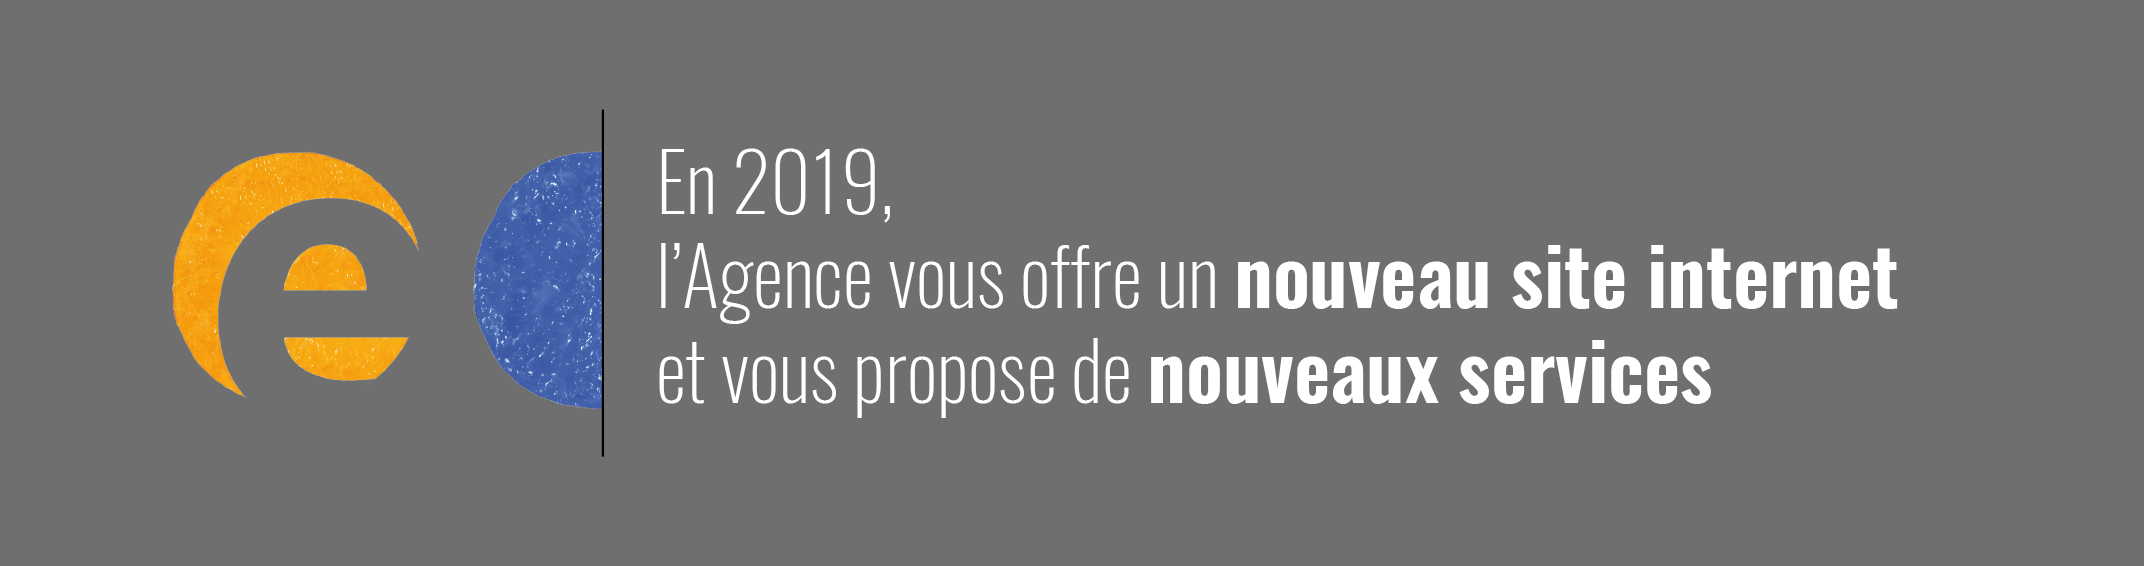 annonce 2019 FB